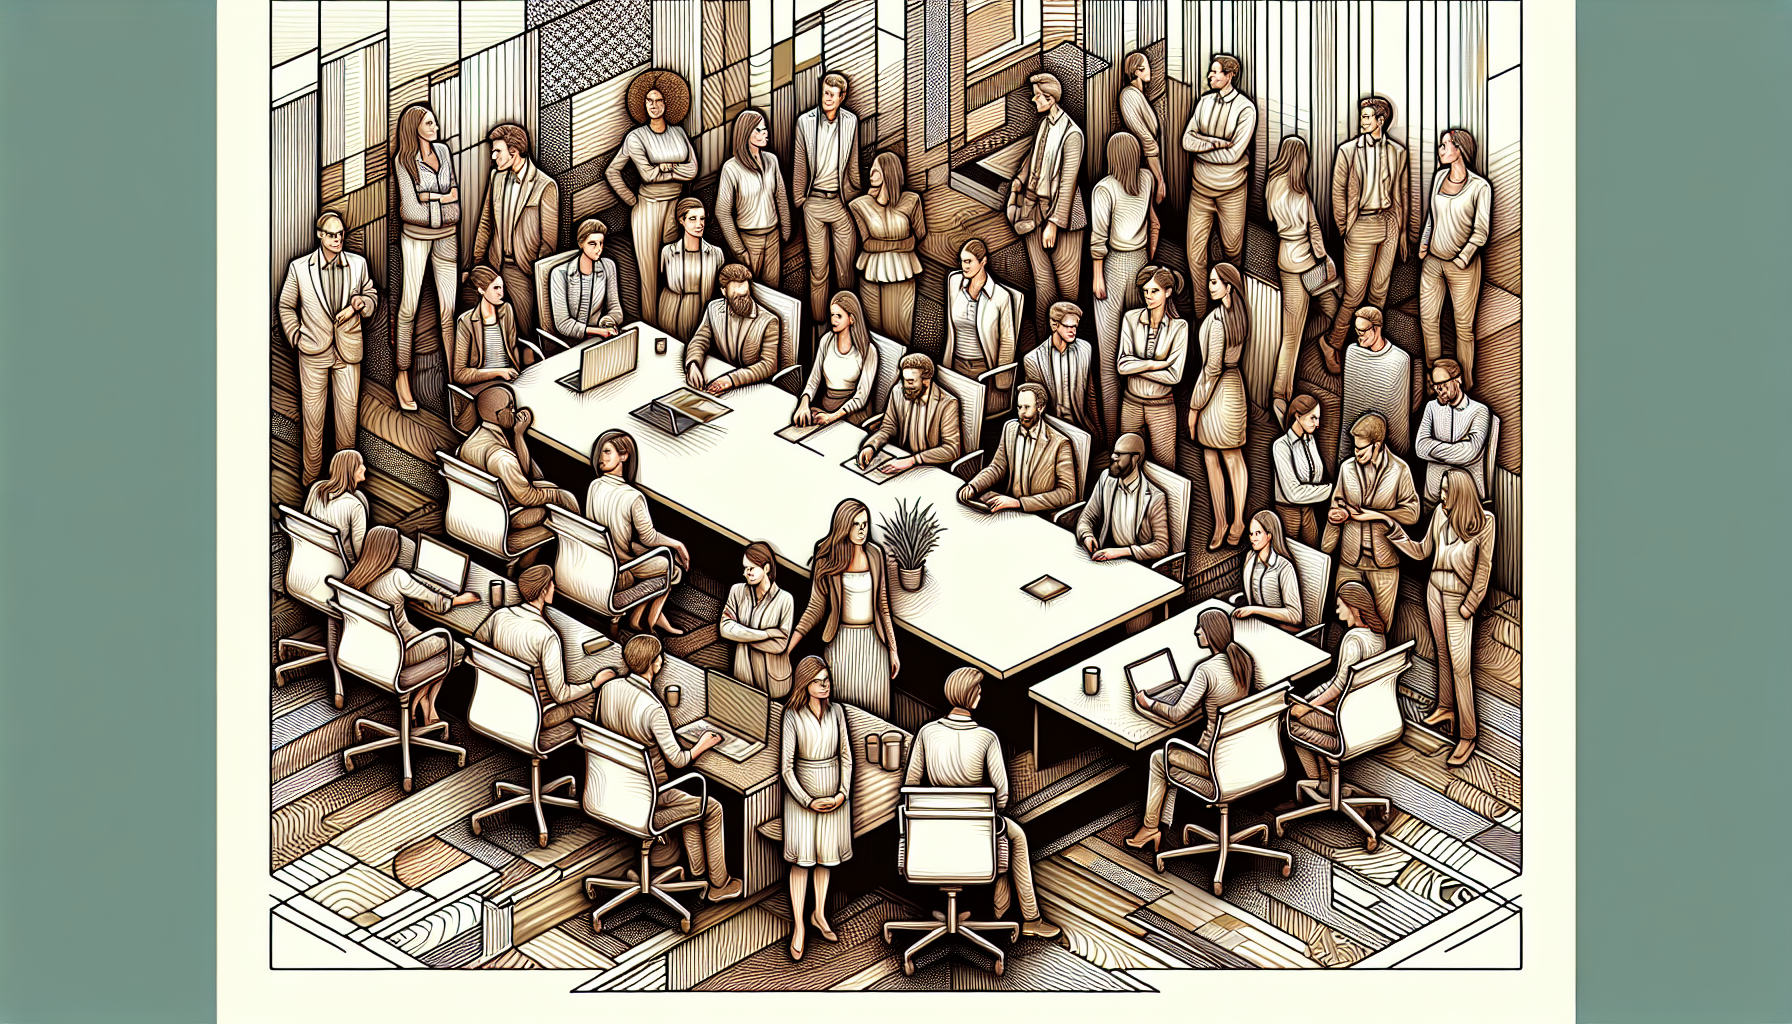 Illustration of a team in a workplace